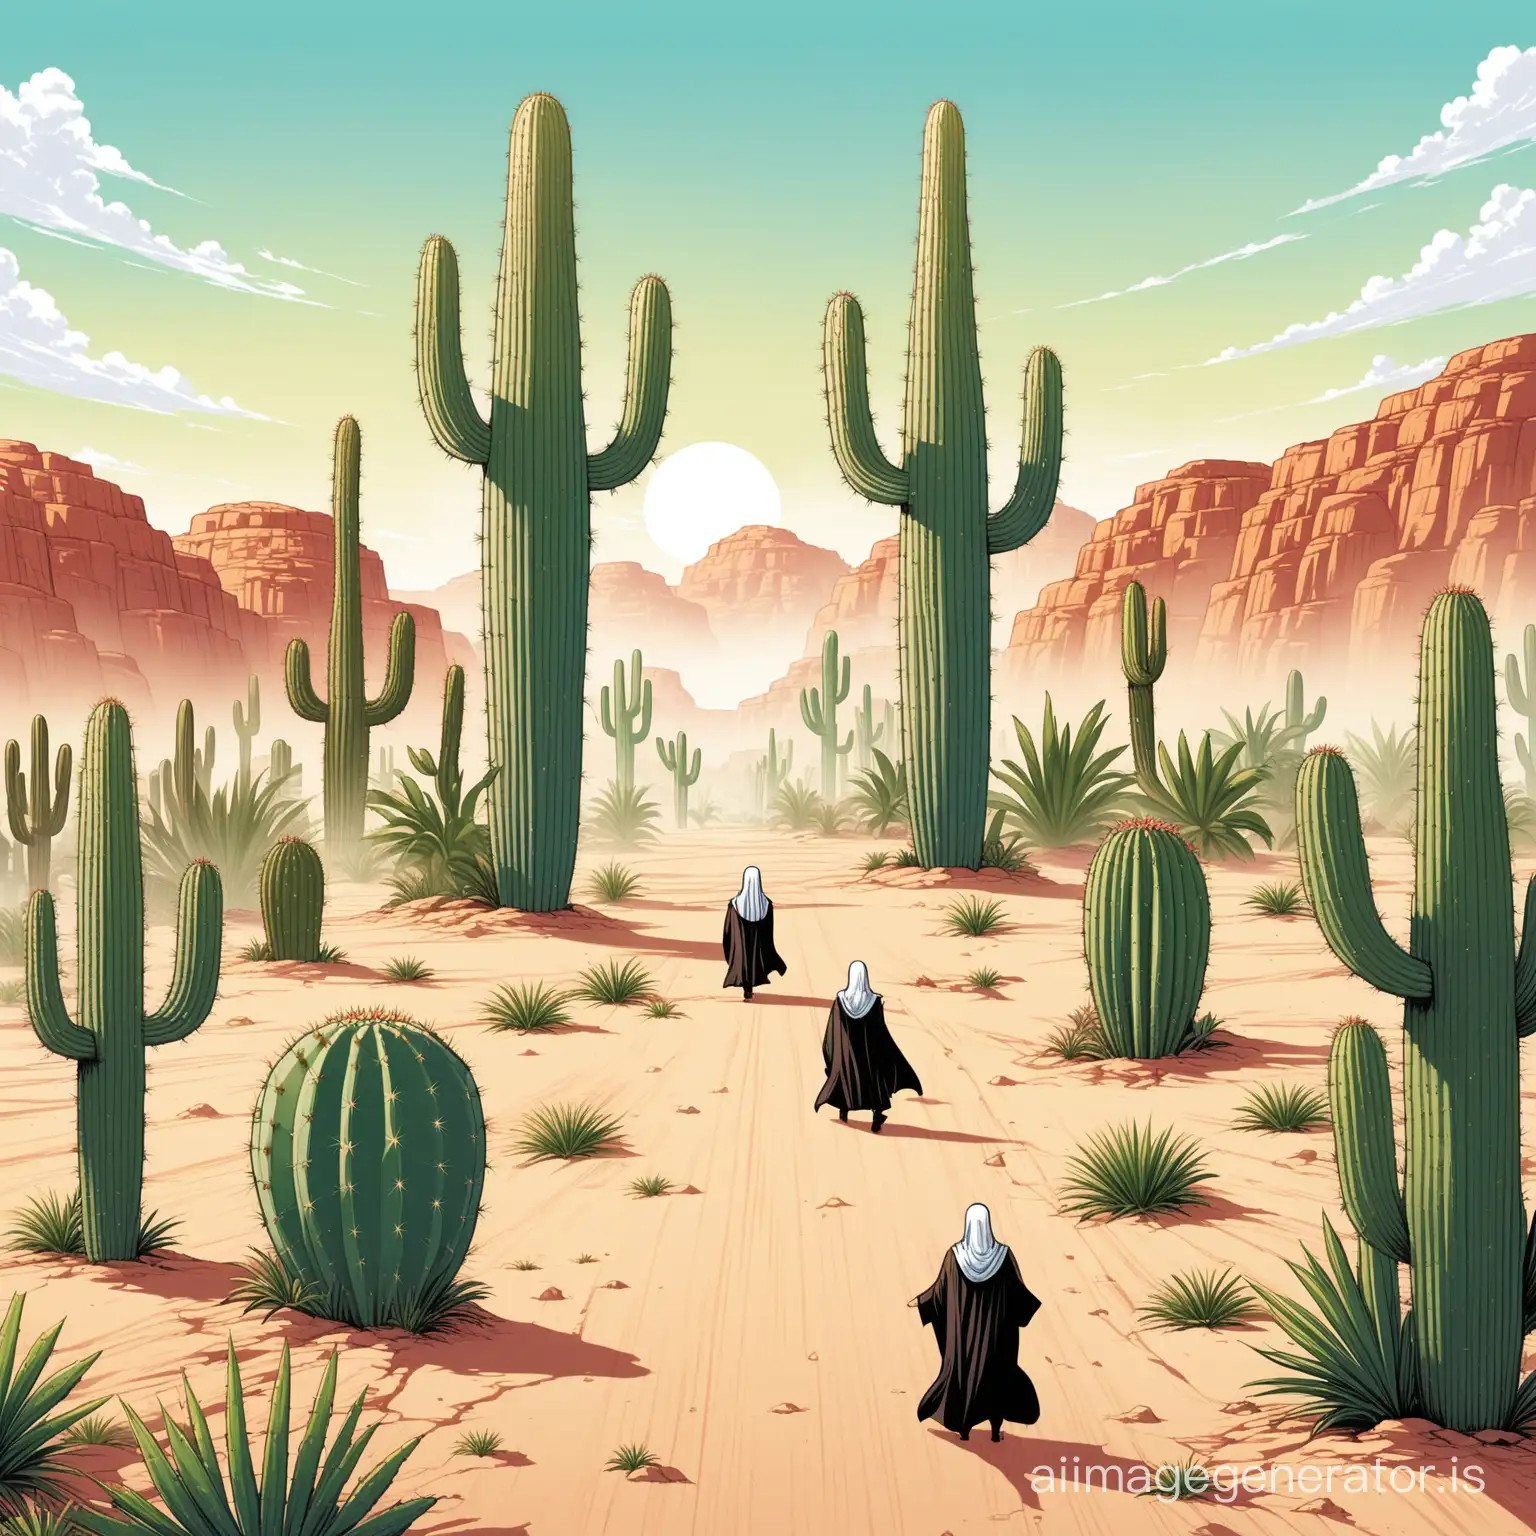 In an unexpected twist, a figure deftly navigates through a desert terrain, swiftly evading towering cacti, each adorned with judicial wigs, as if the plants themselves are presiding over a comical courtroom scene amidst the arid landscape.